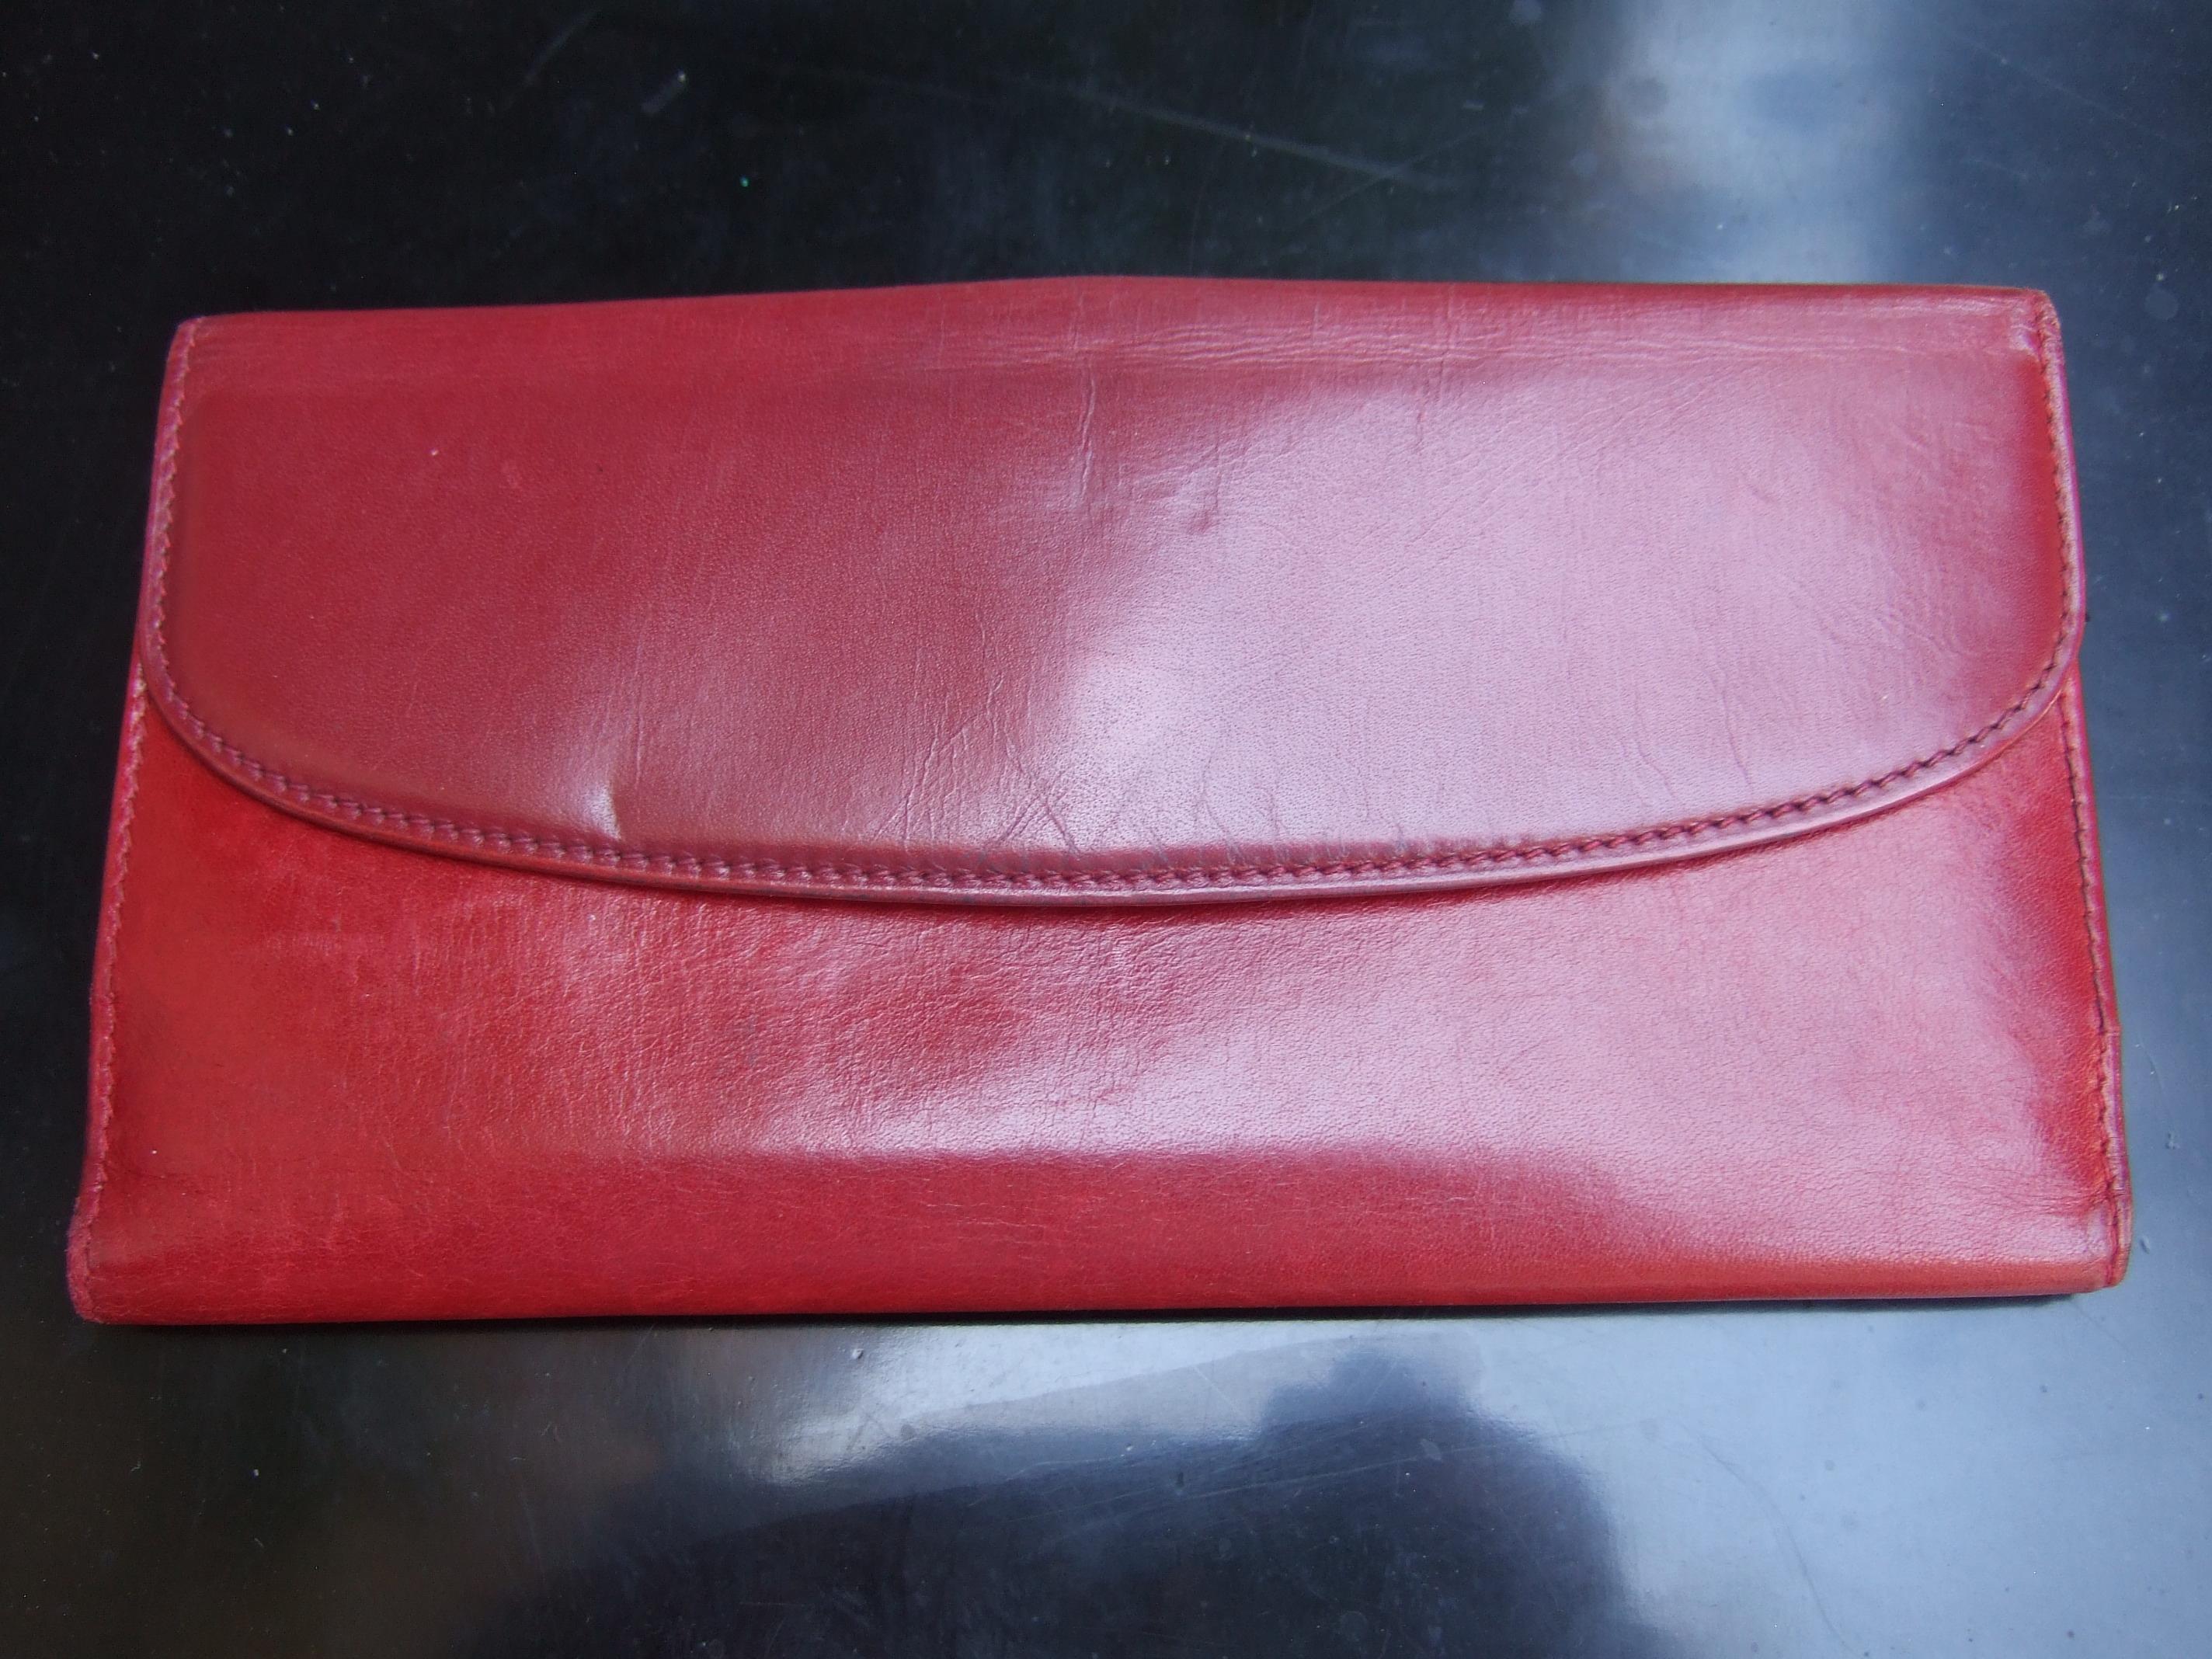 Gucci Italy Rare Cherry Red Leather Hand Clasp Wallet c 1980s  2